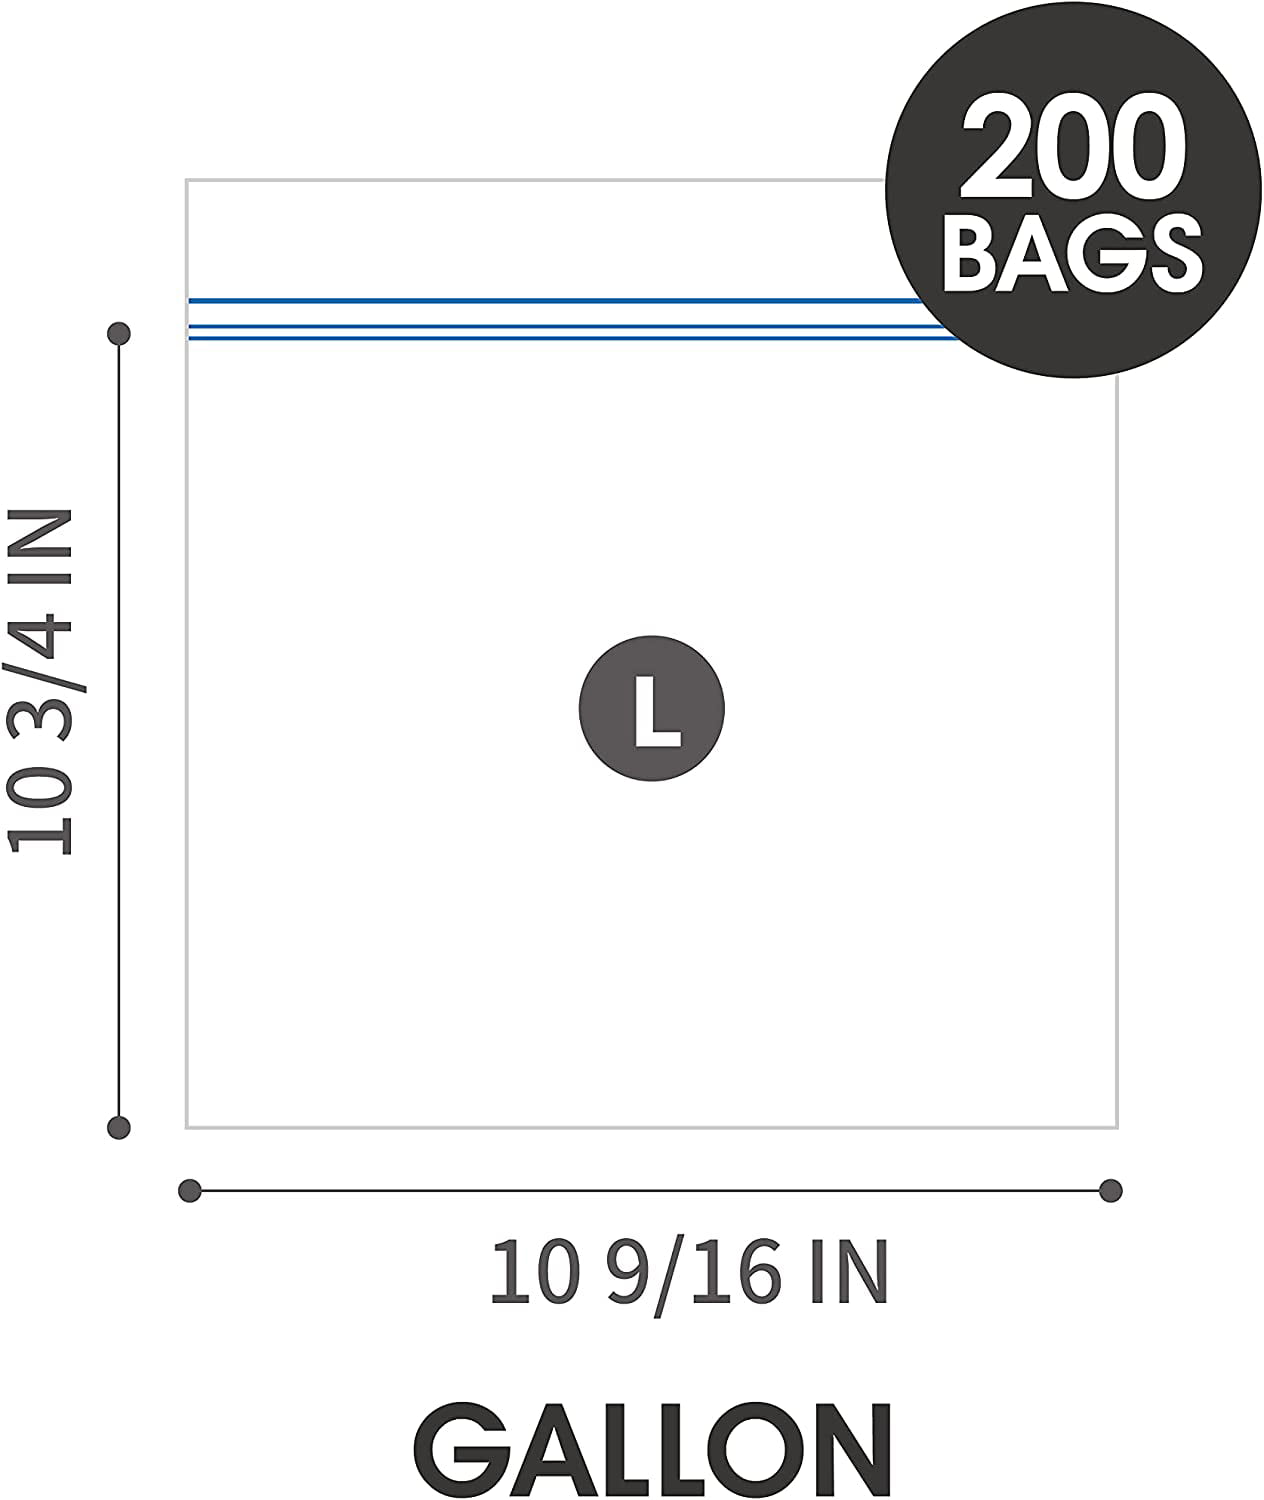 24/7 Bags- XXL Storage Bags, 20 Gallons, 9 Count, Expandable Bottom With  Carry Handle